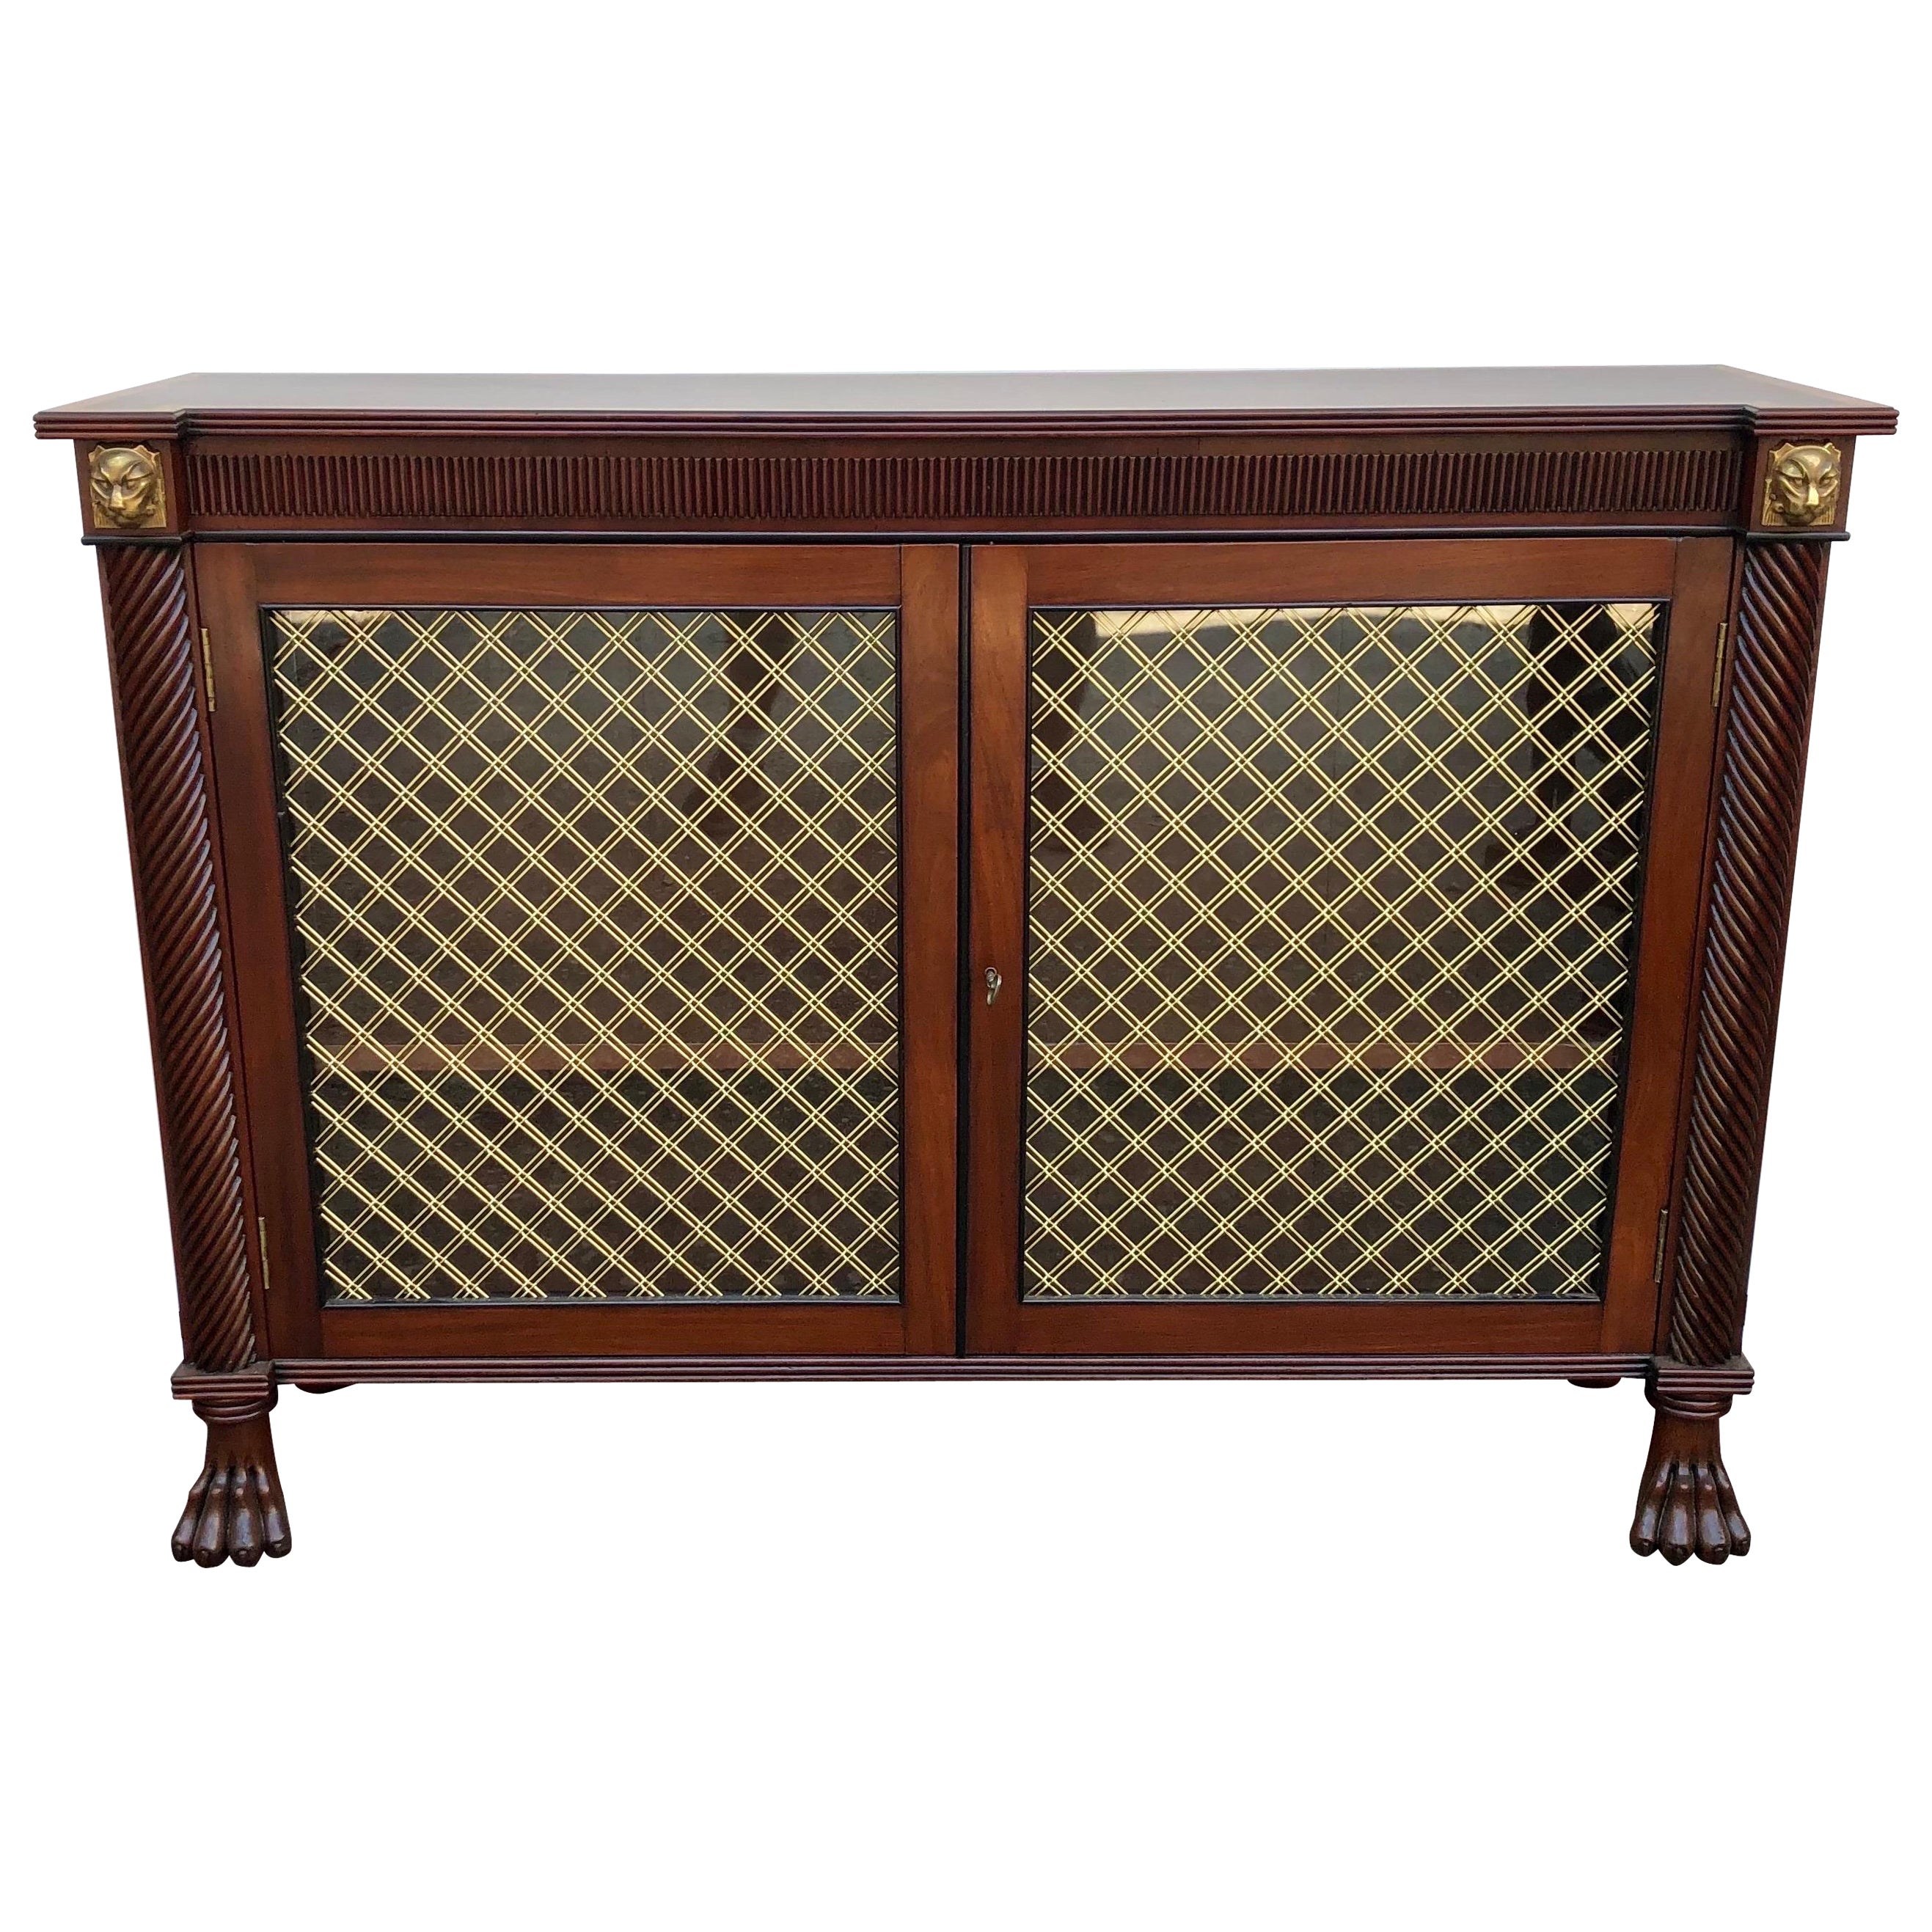 English Regency Mahogany Two Door Credenza / Side Cabinet, Early 19th Century For Sale